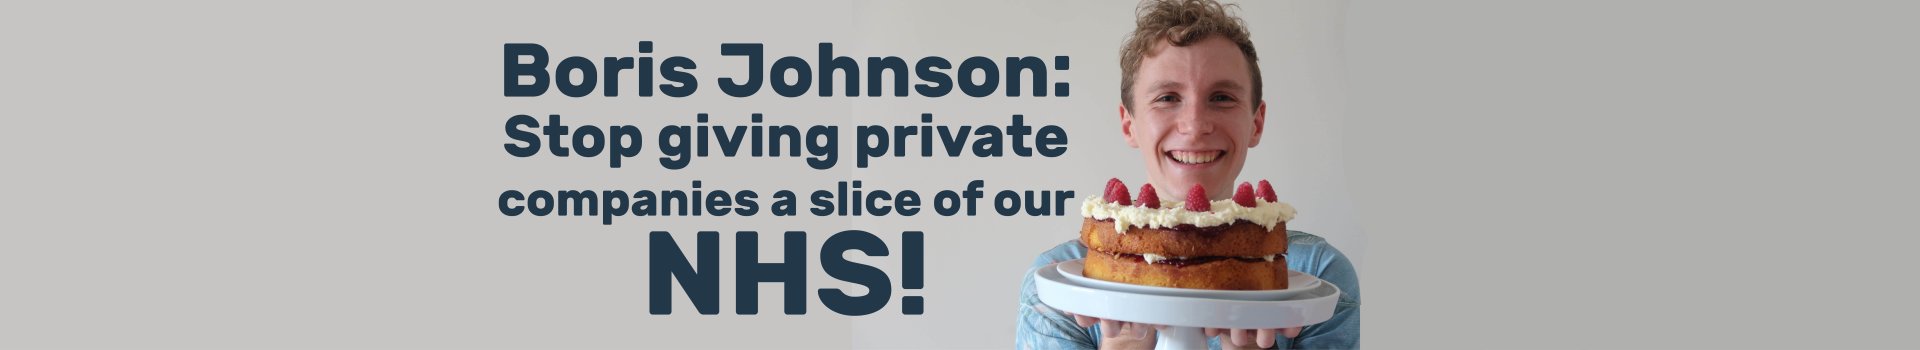 Image of a person holding a cake with text reading "Boris Johnson: Stop giving private companies a slice of our NHS!"